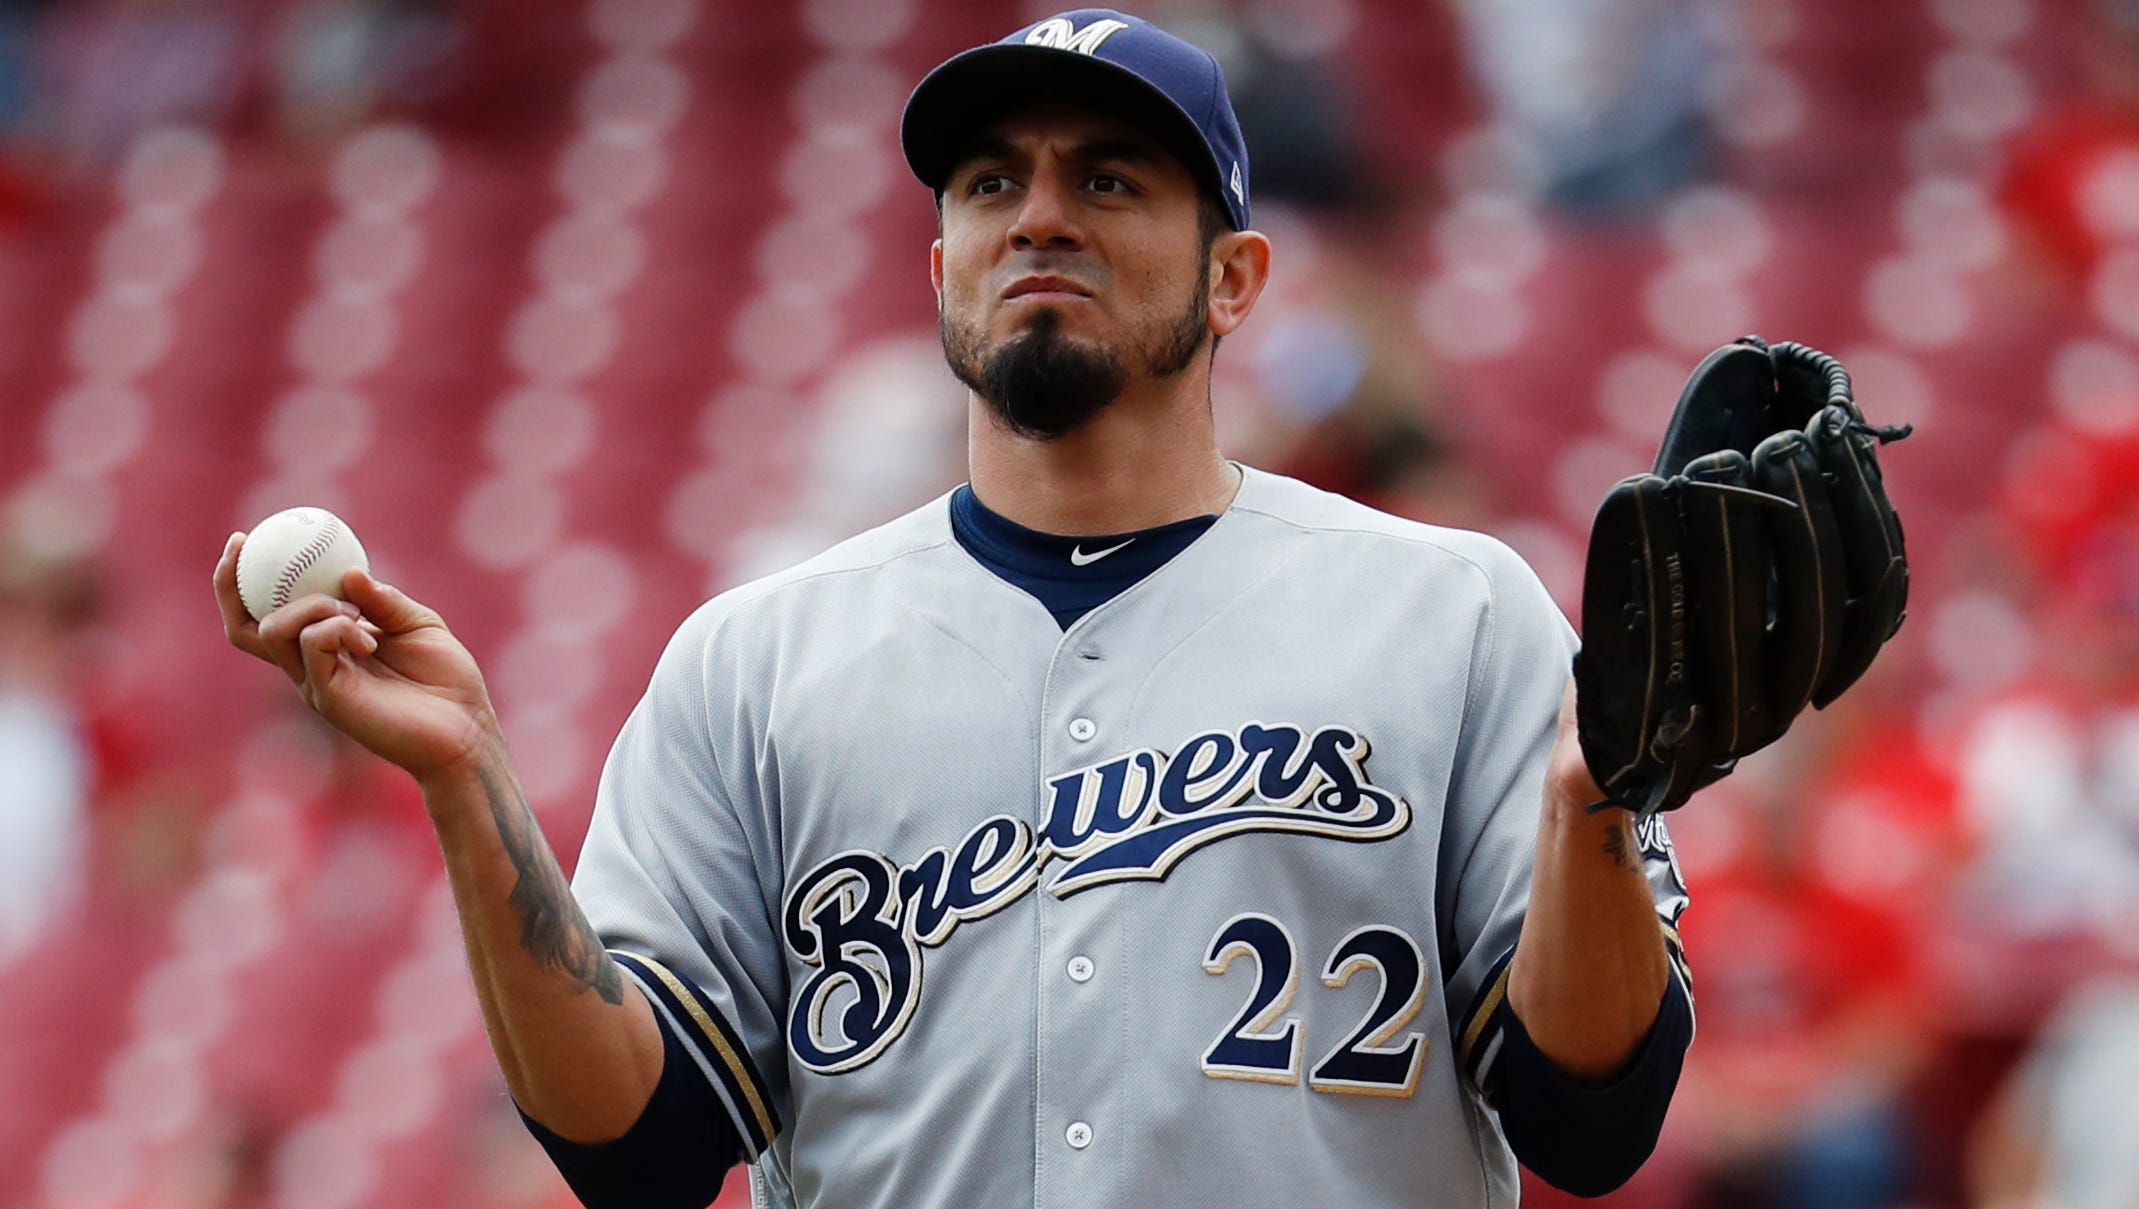 Matt Garza was as bad a pitcher as he was a nice guy for the Brewers